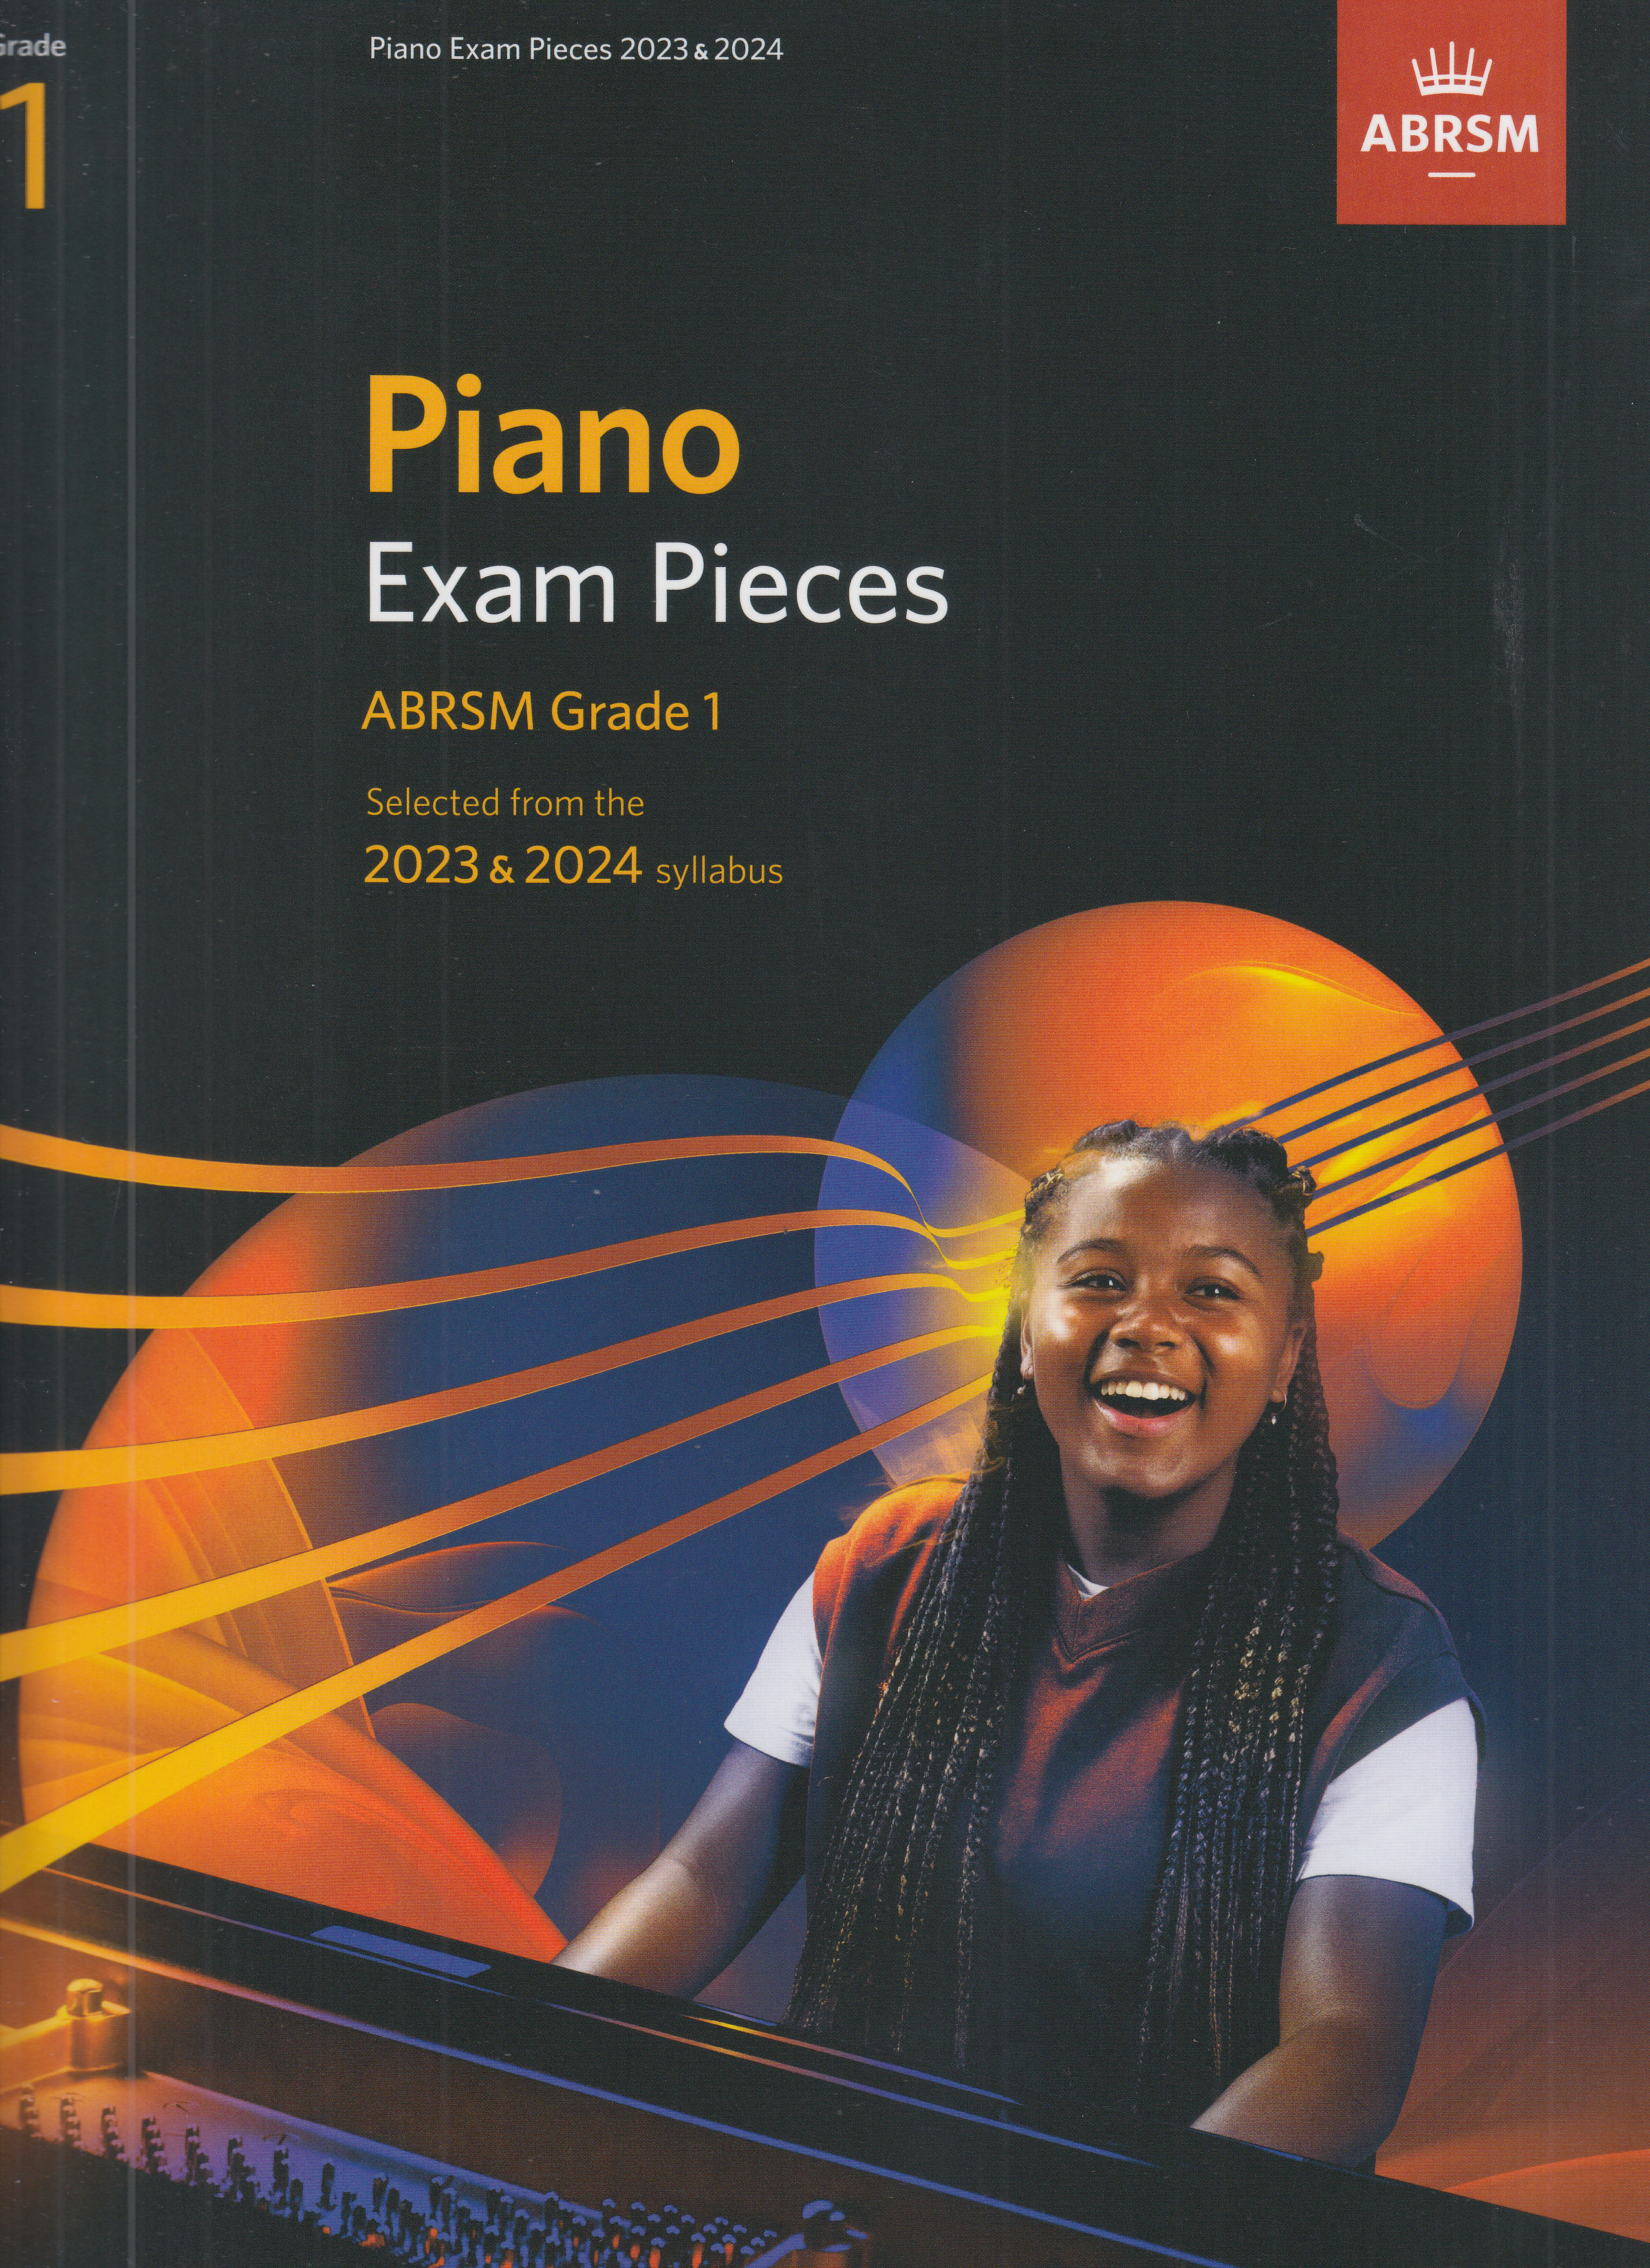 ABRSM Piano Exam Pieces 2023-2024 Grade 1: Selected from the 2023 & 2024 syllabus